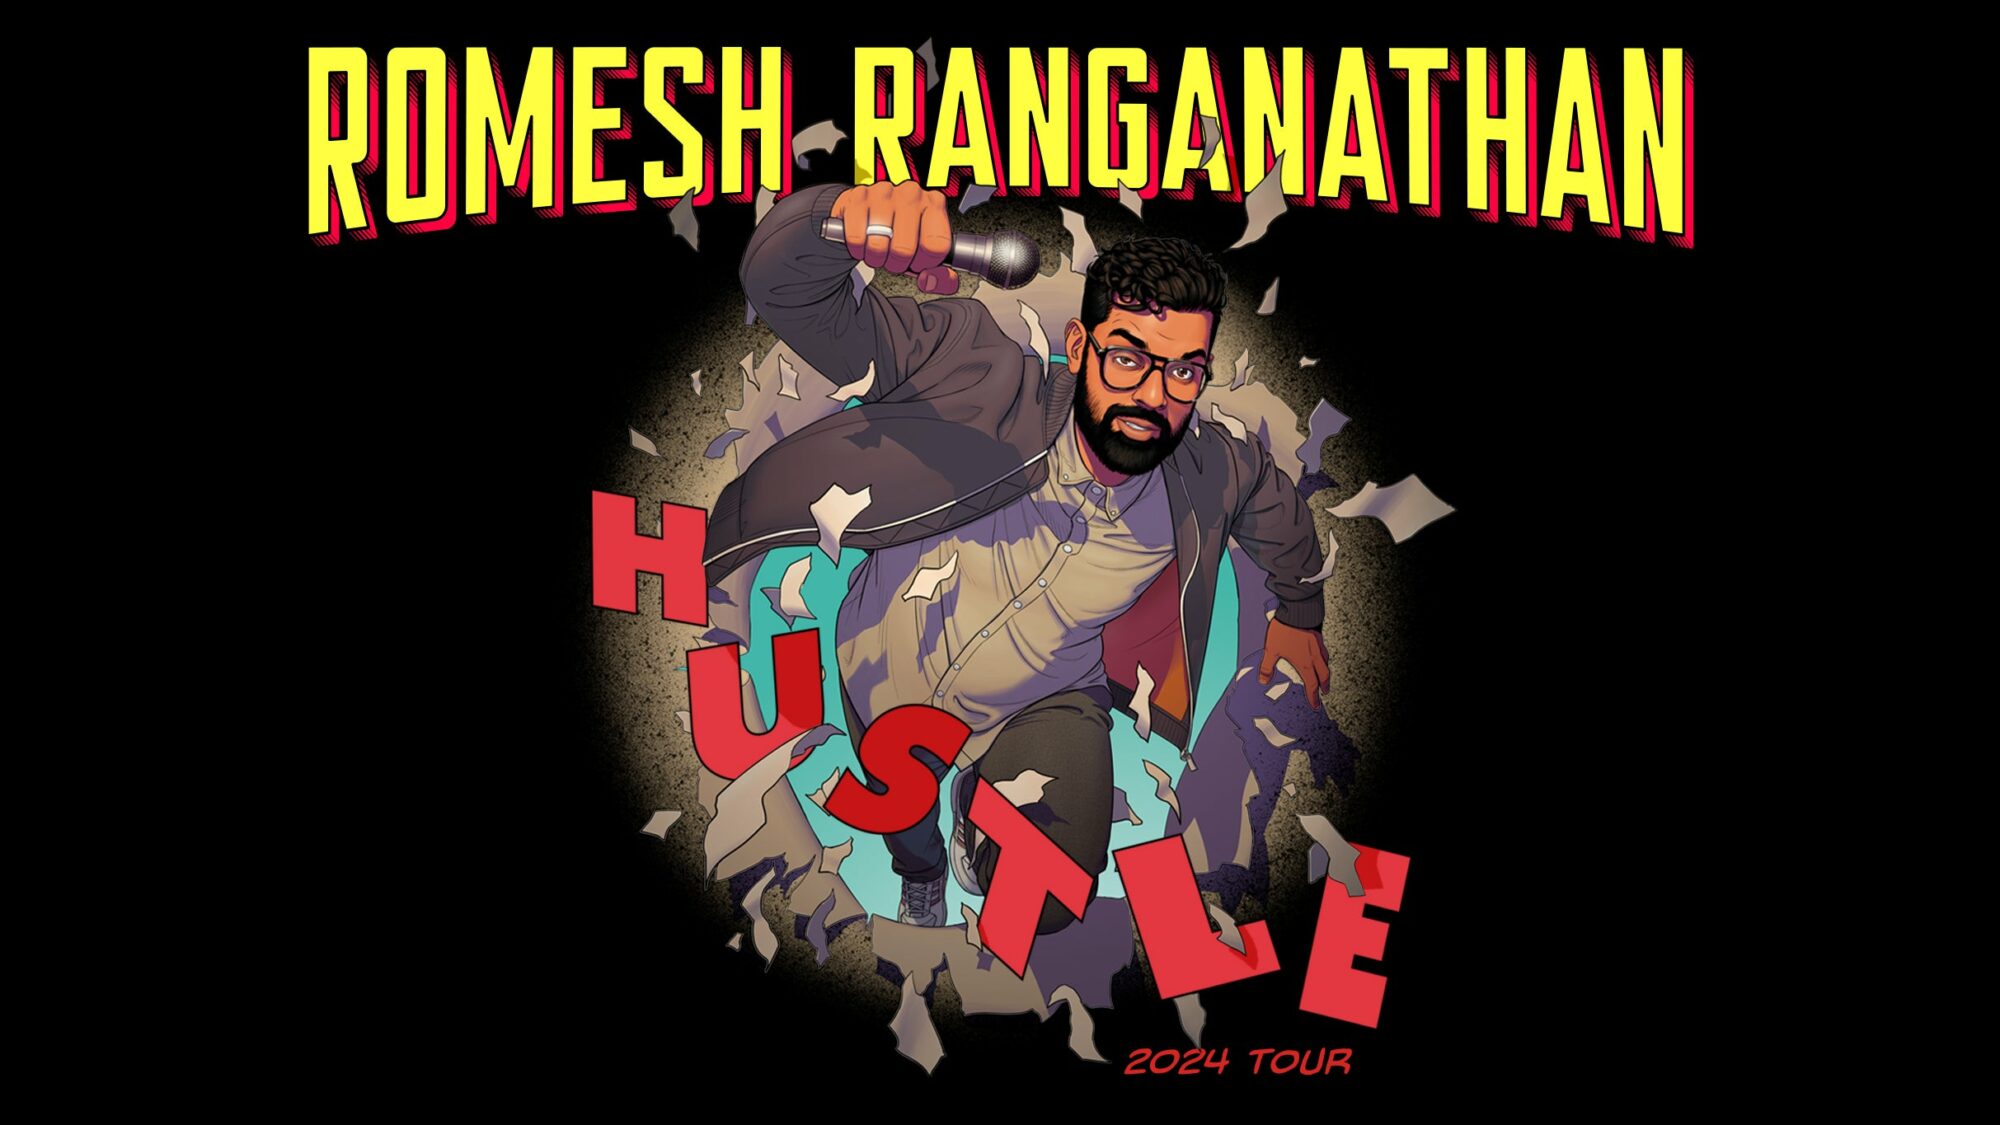 Image name Romesh Ranganathan at First Direct Arena Leeds the 1 image from the post Romesh Ranganathan - Premium Package - The Gallery at First Direct Arena, Leeds in Yorkshire.com.